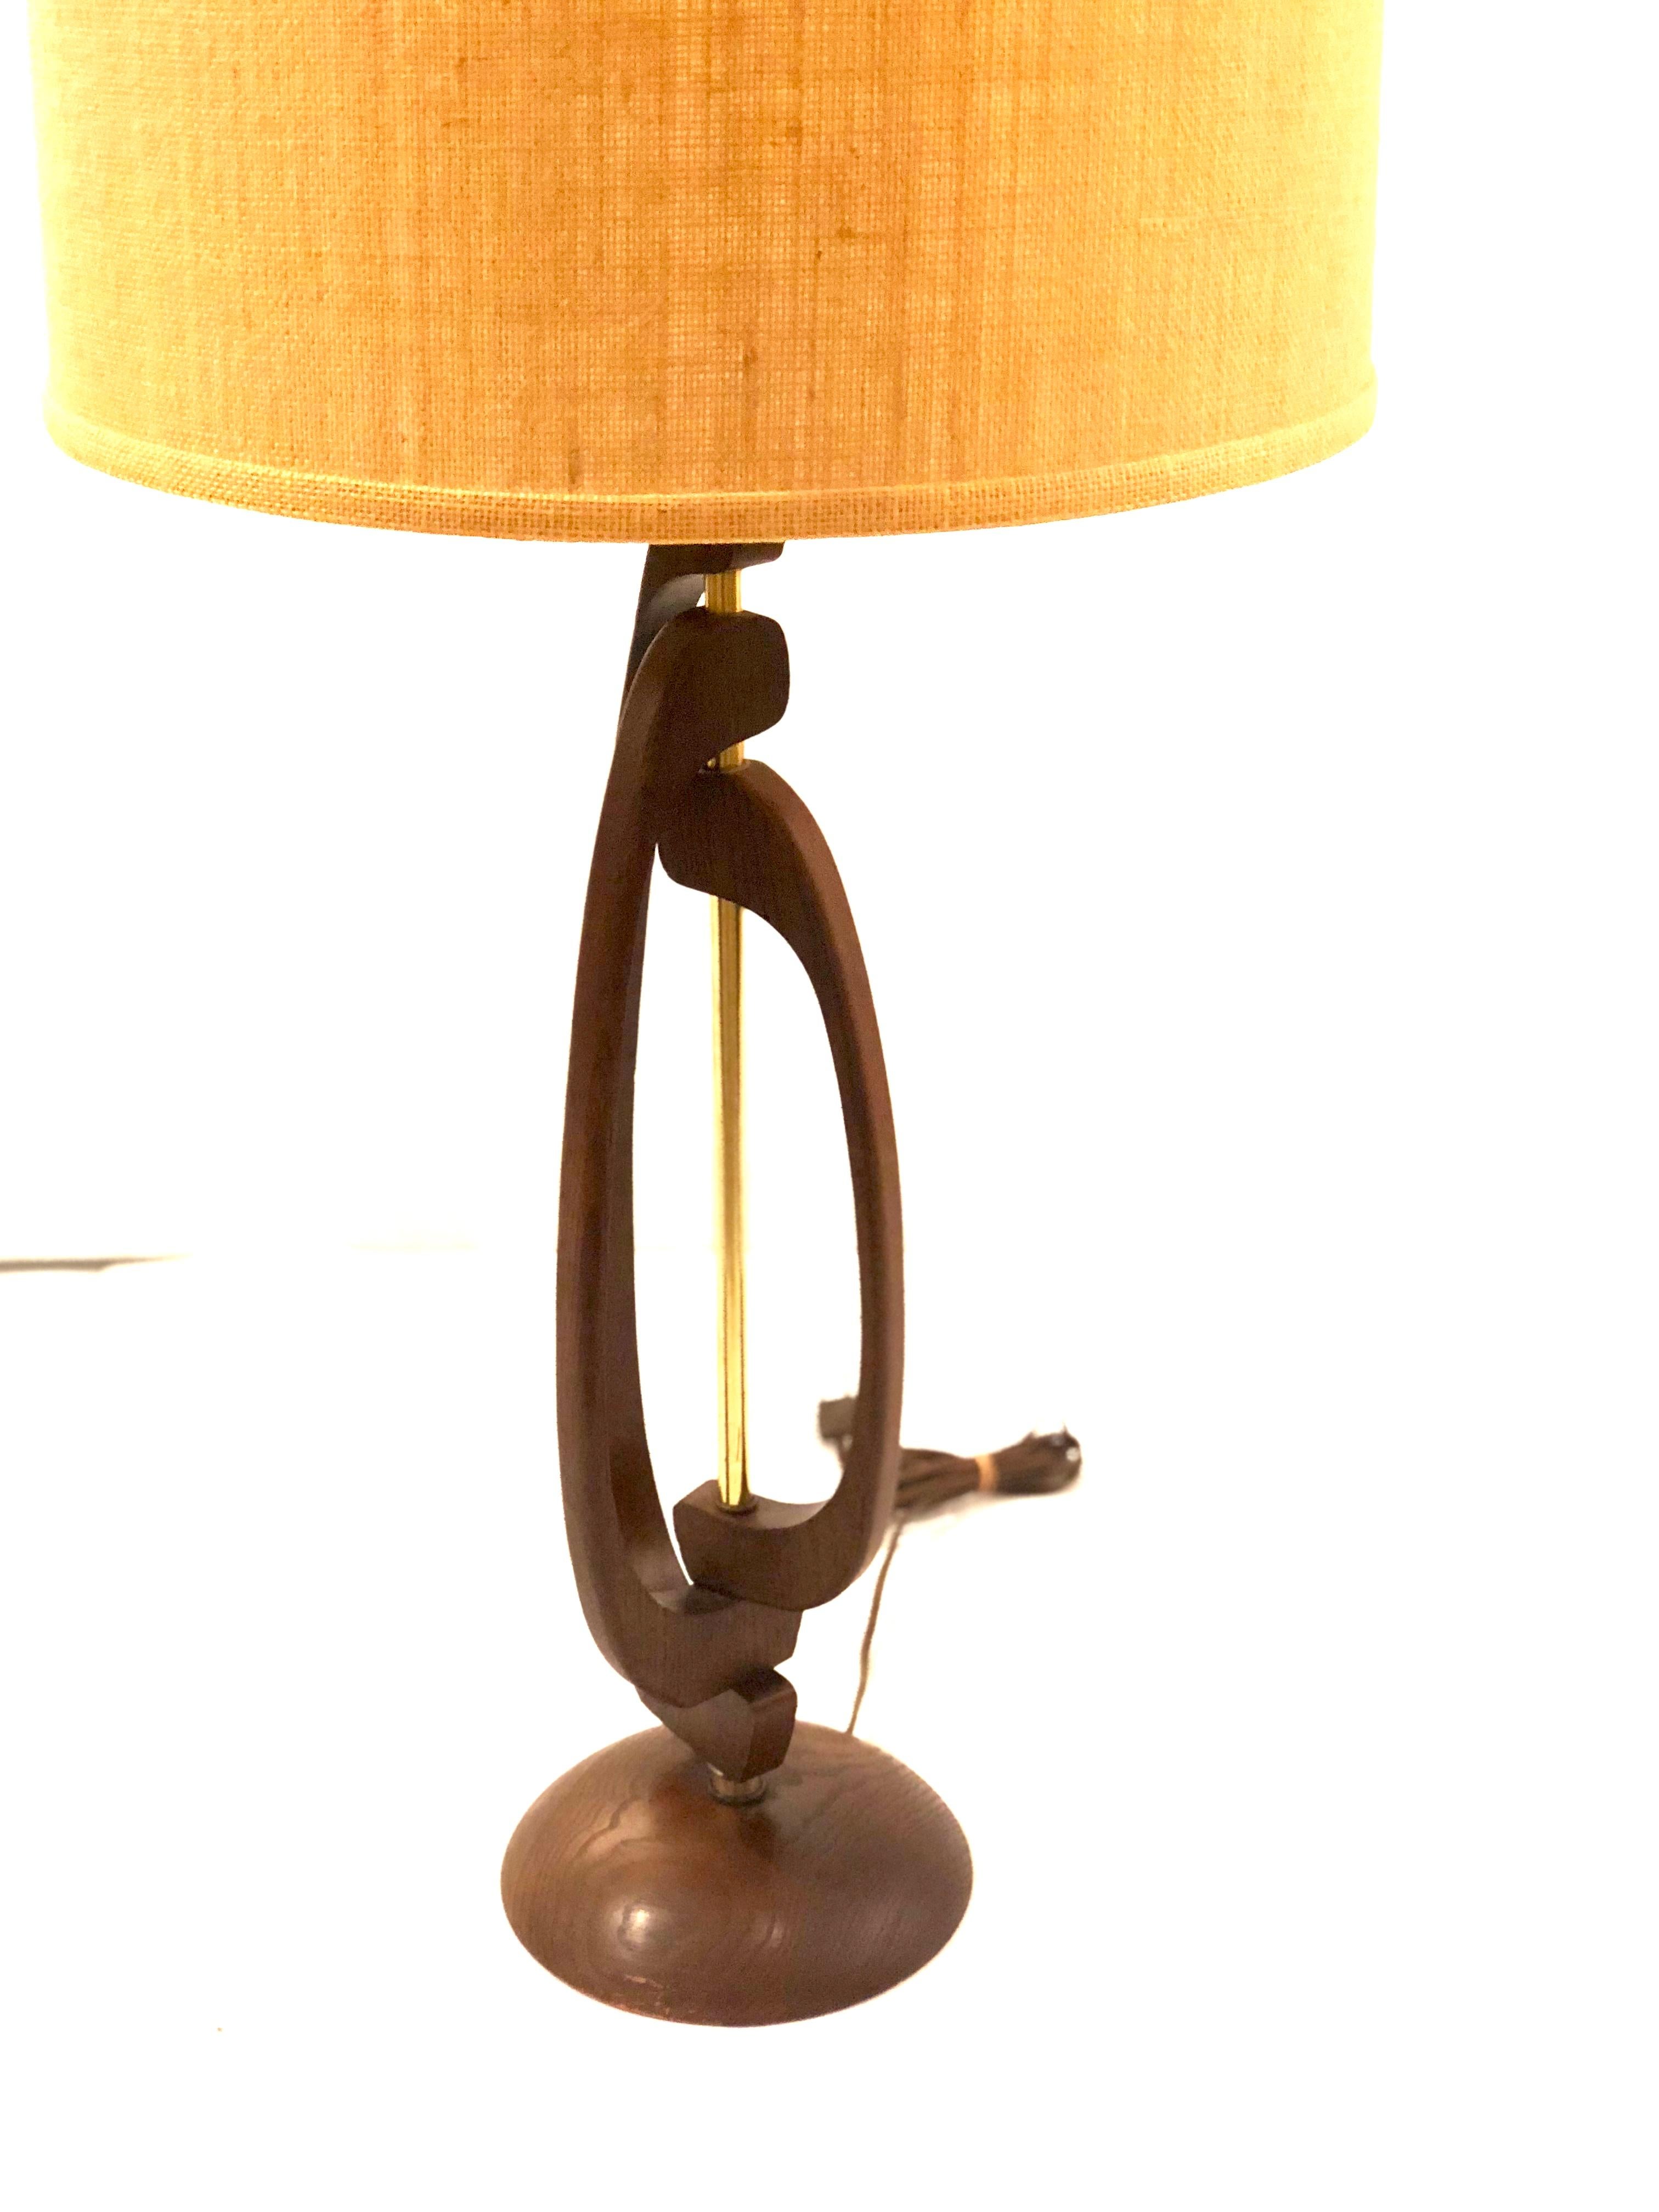 20th Century Pair of Mid-Century Modern Table Lamps by Modeline